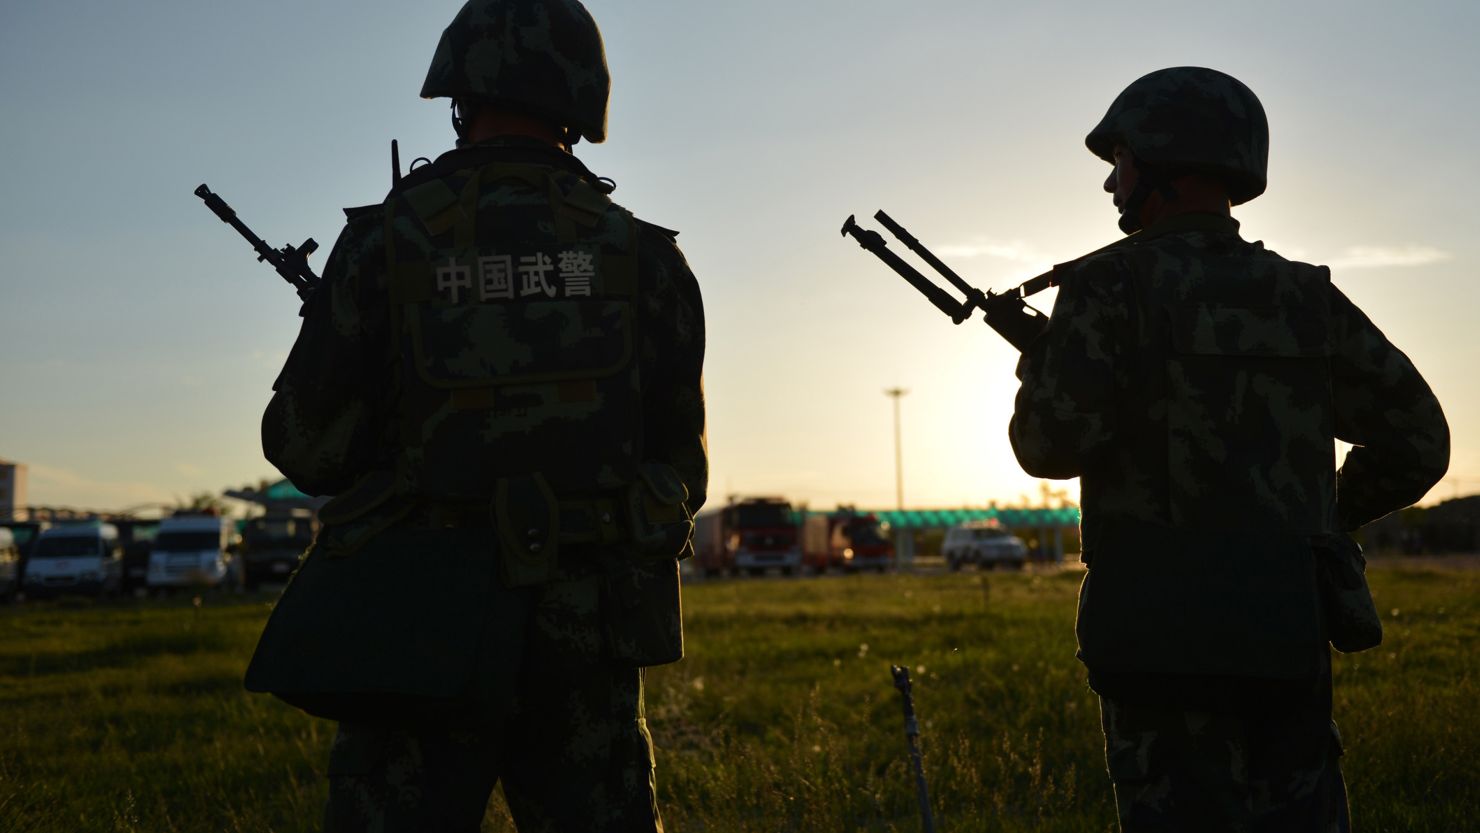 Anti-terrorism police attend an exercise in China's Xinjiang region in 2013.